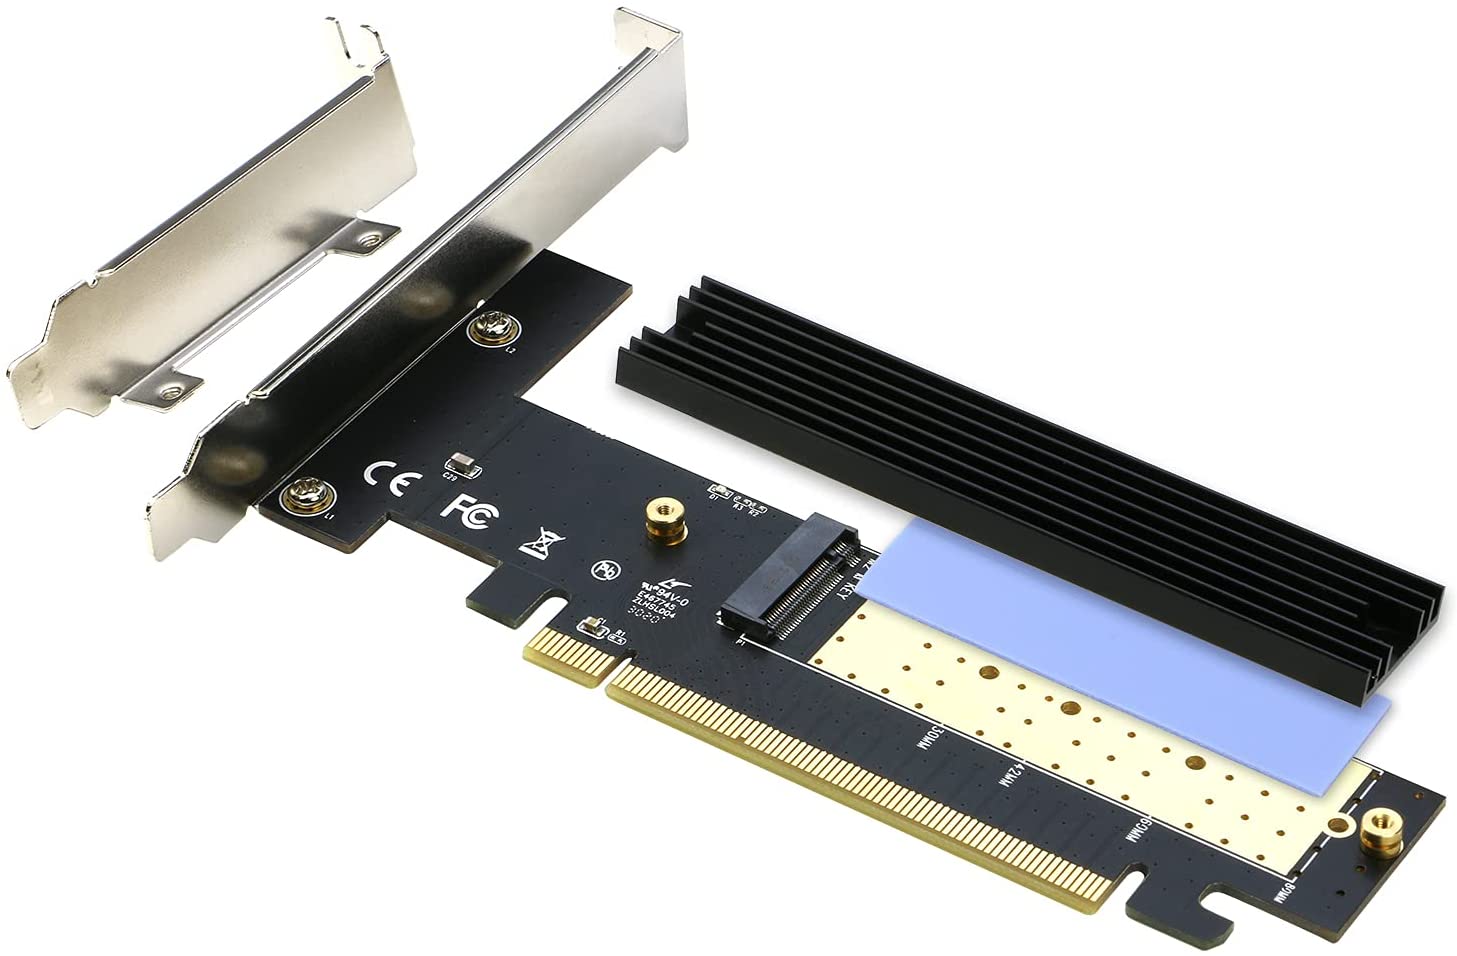 Frastødende Uforenelig Gammeldags NVMe to PCIe Adapter x16, RIITOP M.2 NVMe SSD to PCI-e 3.0 x16 Adapter